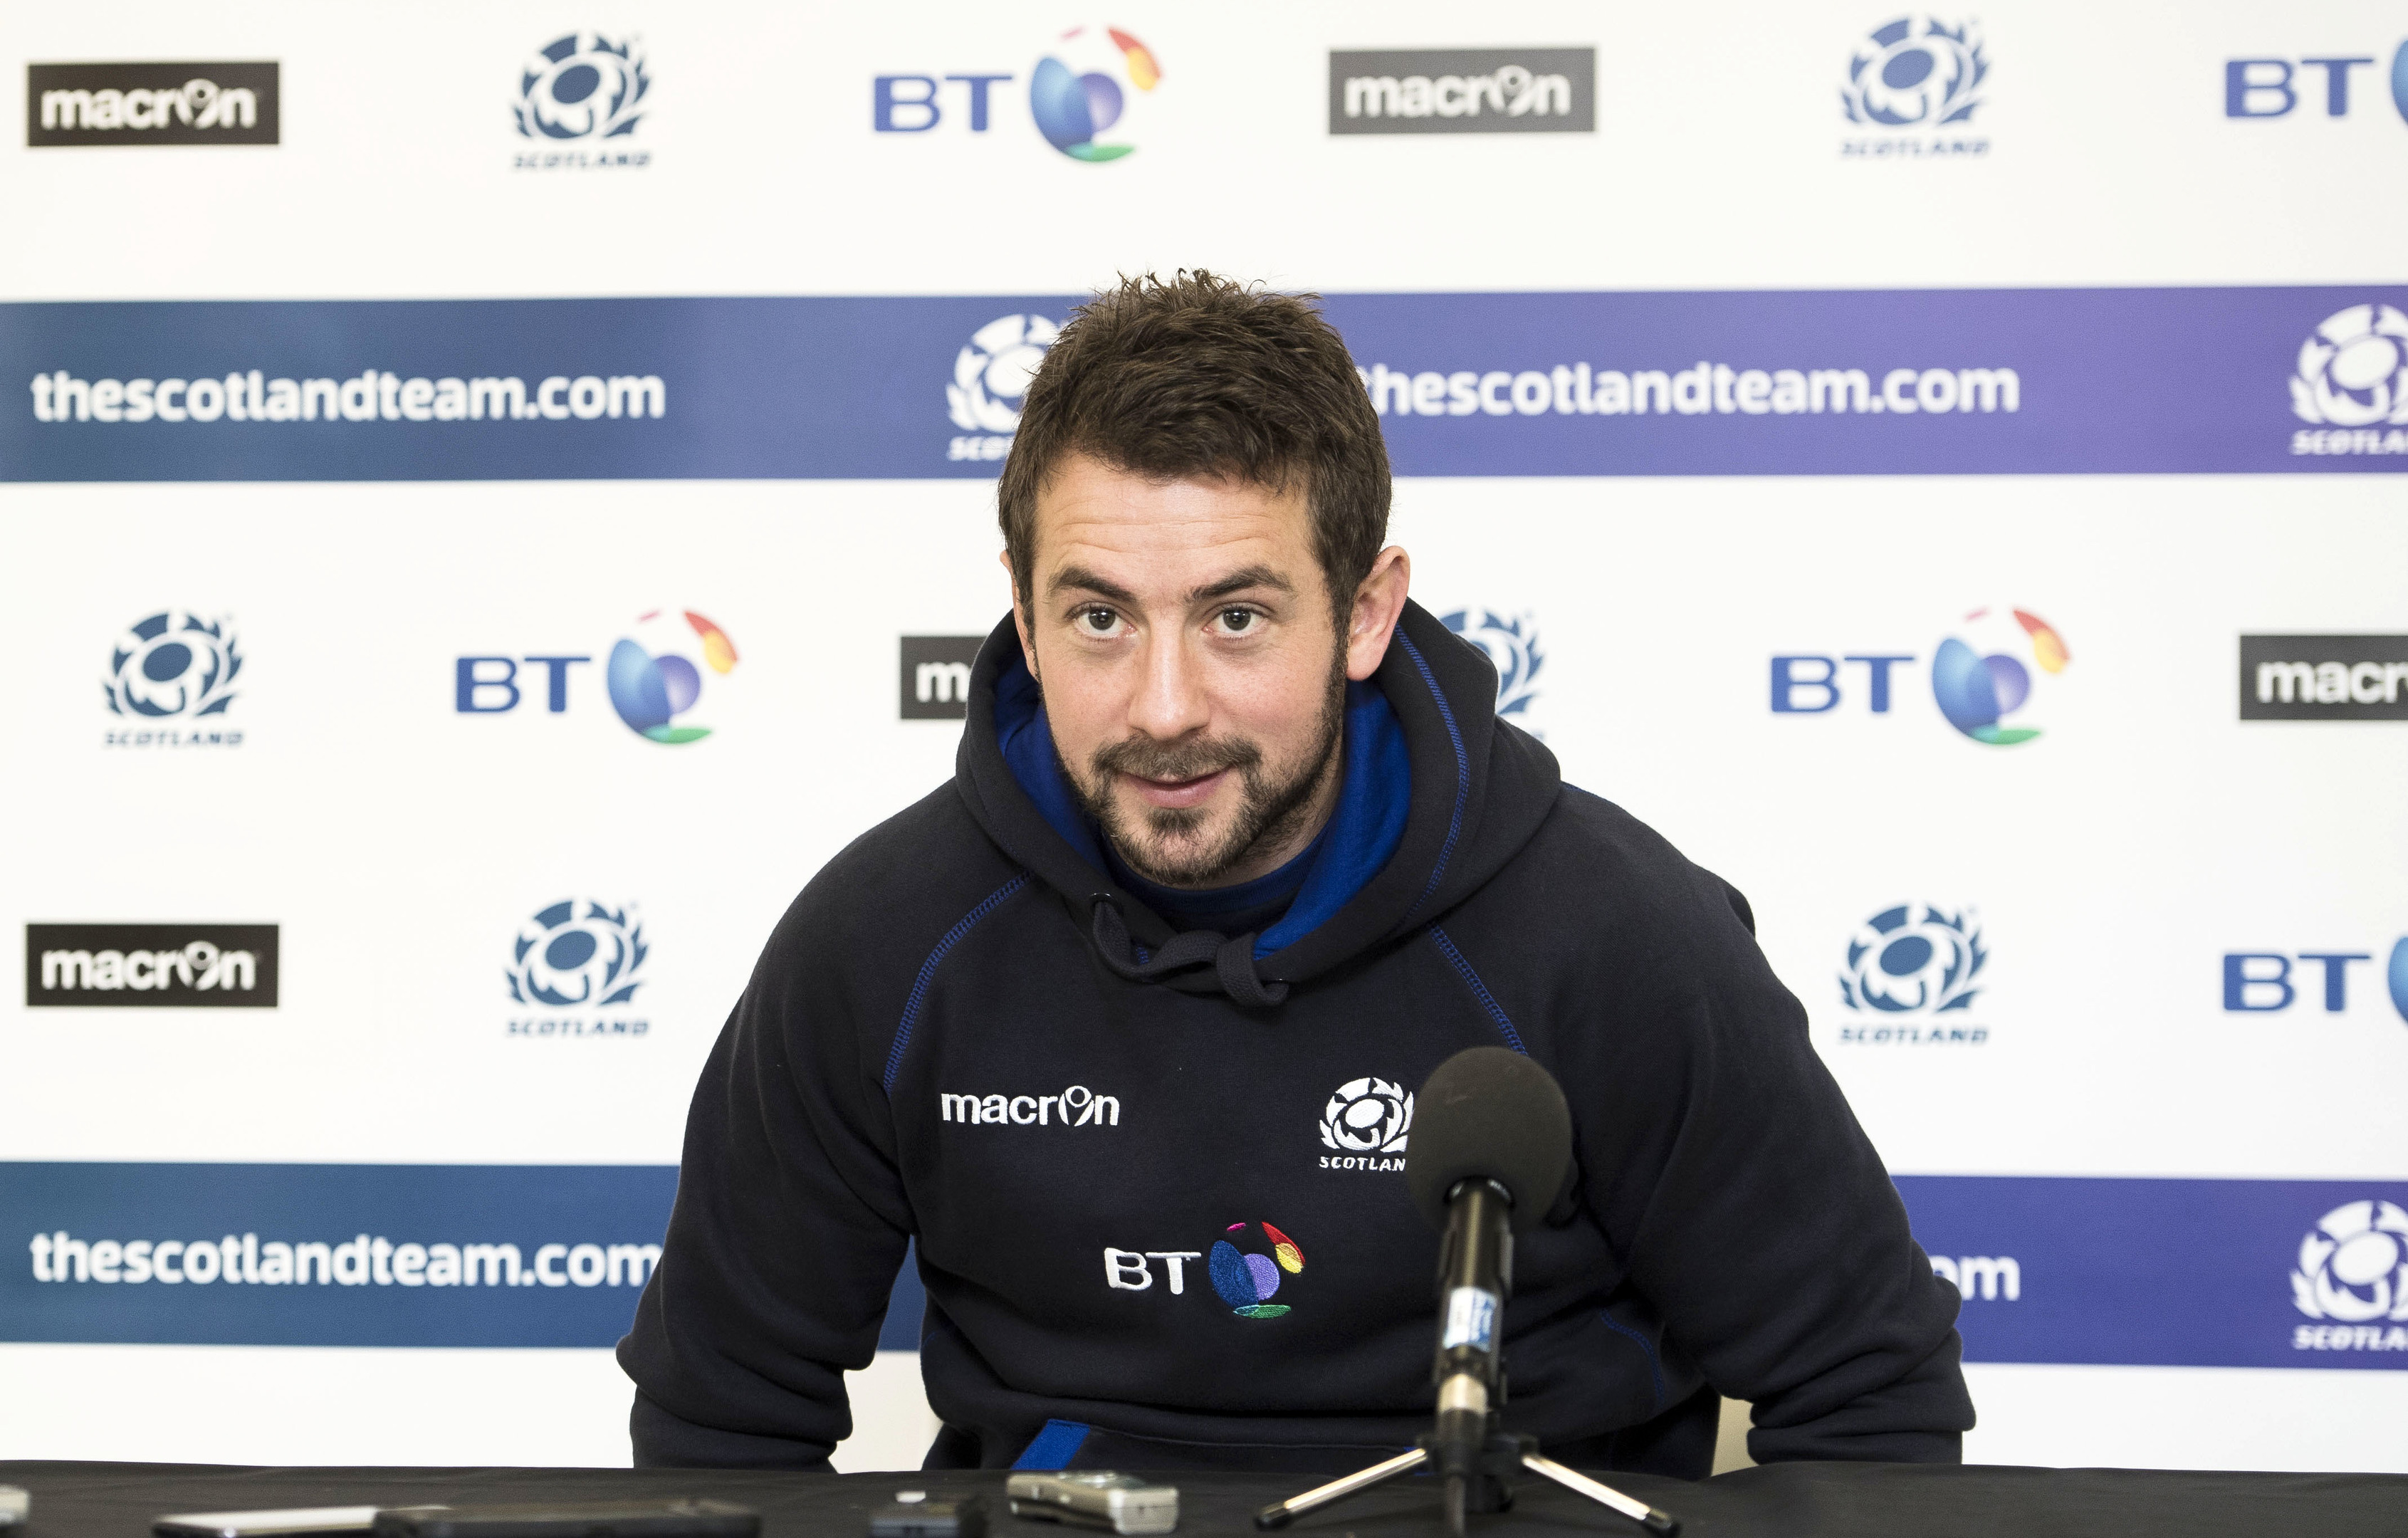 Ruled out — but who should replace Greig Laidlaw?